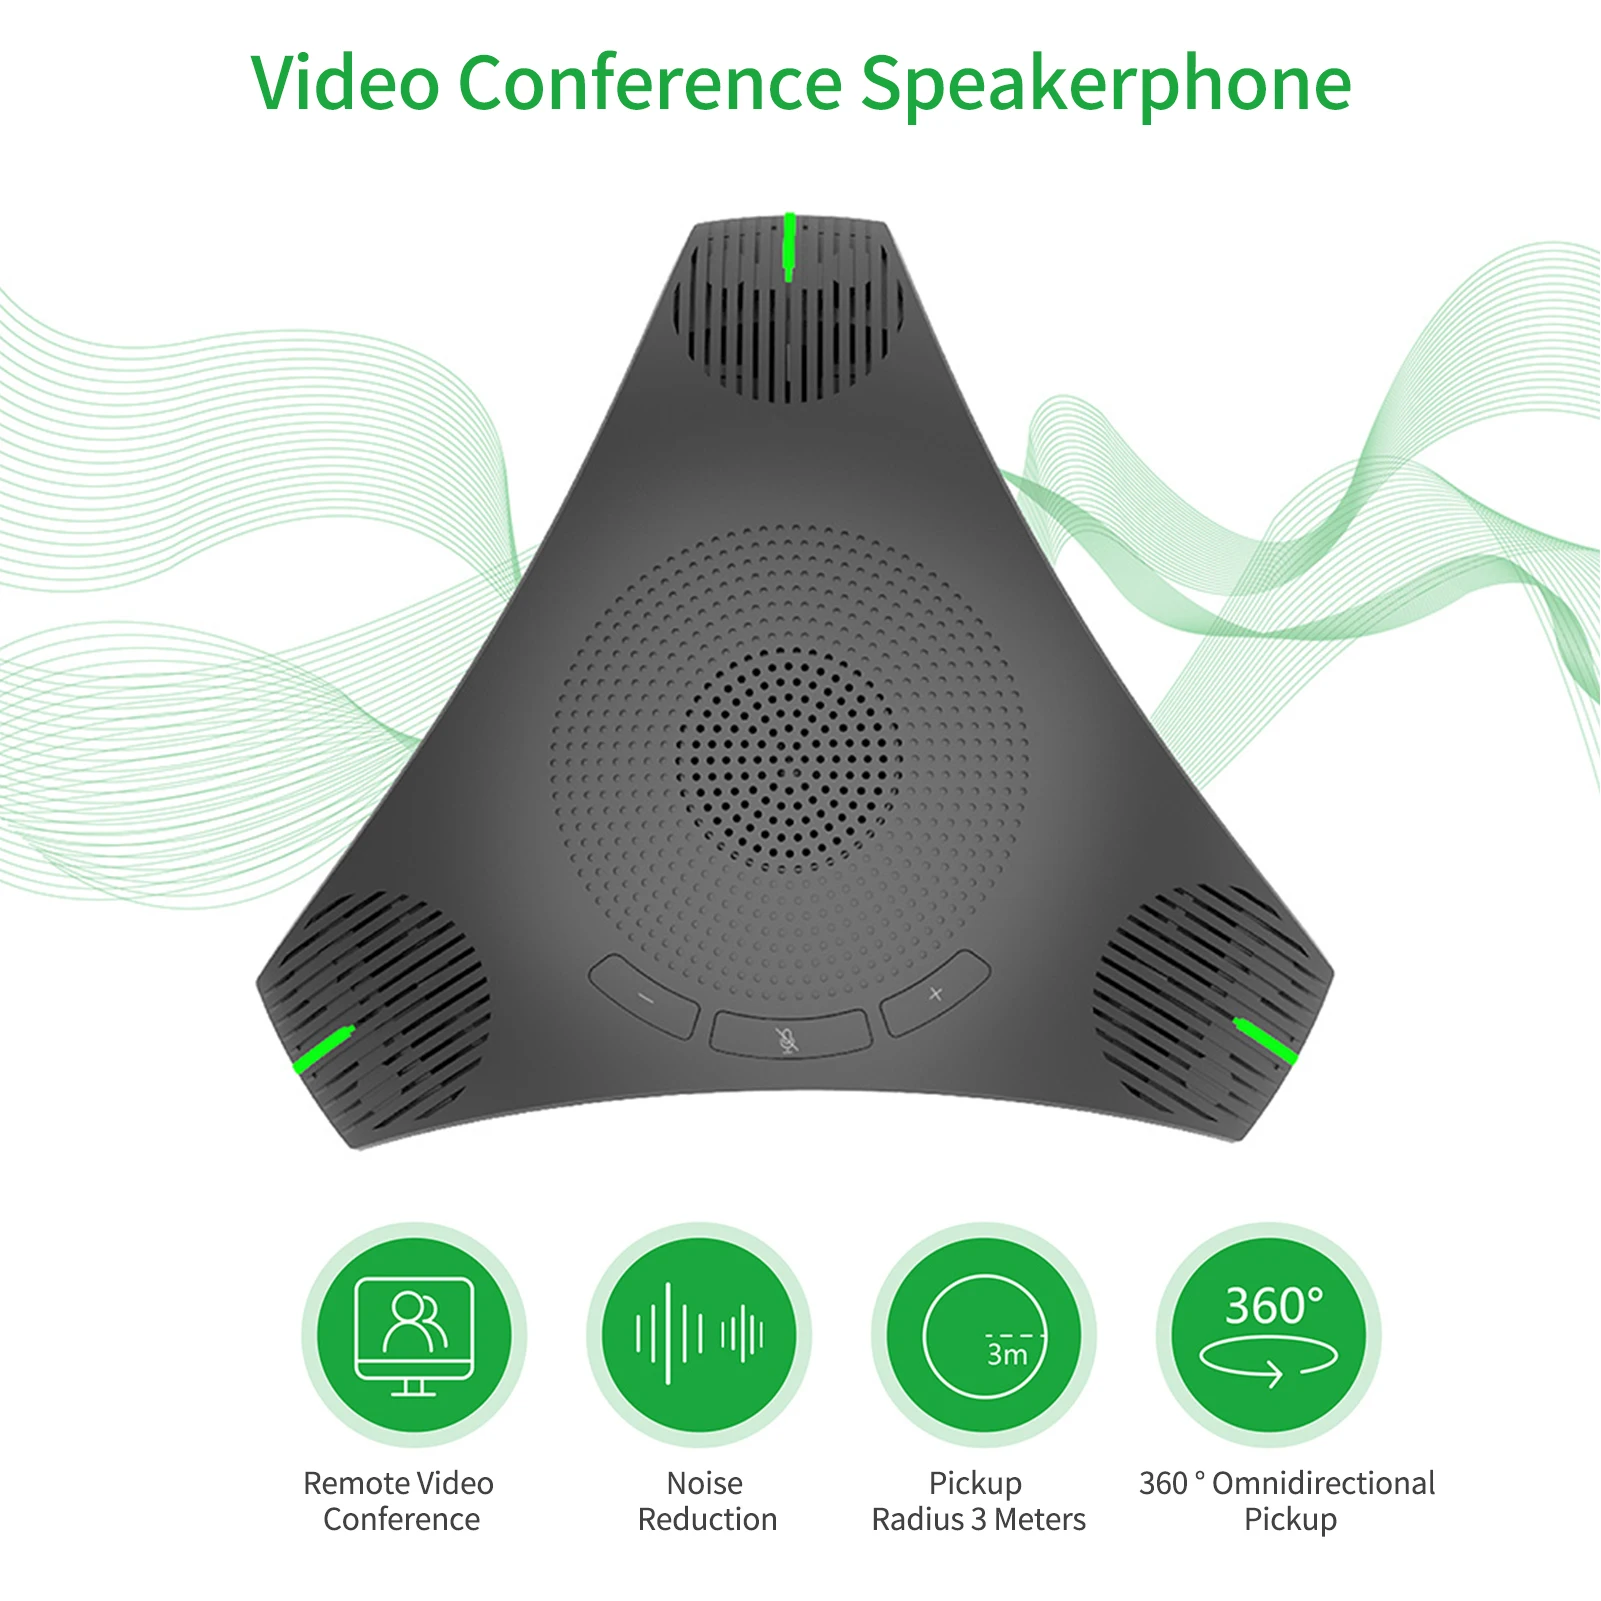 

USB Speakerphone Conference Microphone Omnidirectional Computer Mic for Video Conference/Online Course/Live Streaming/Gaming